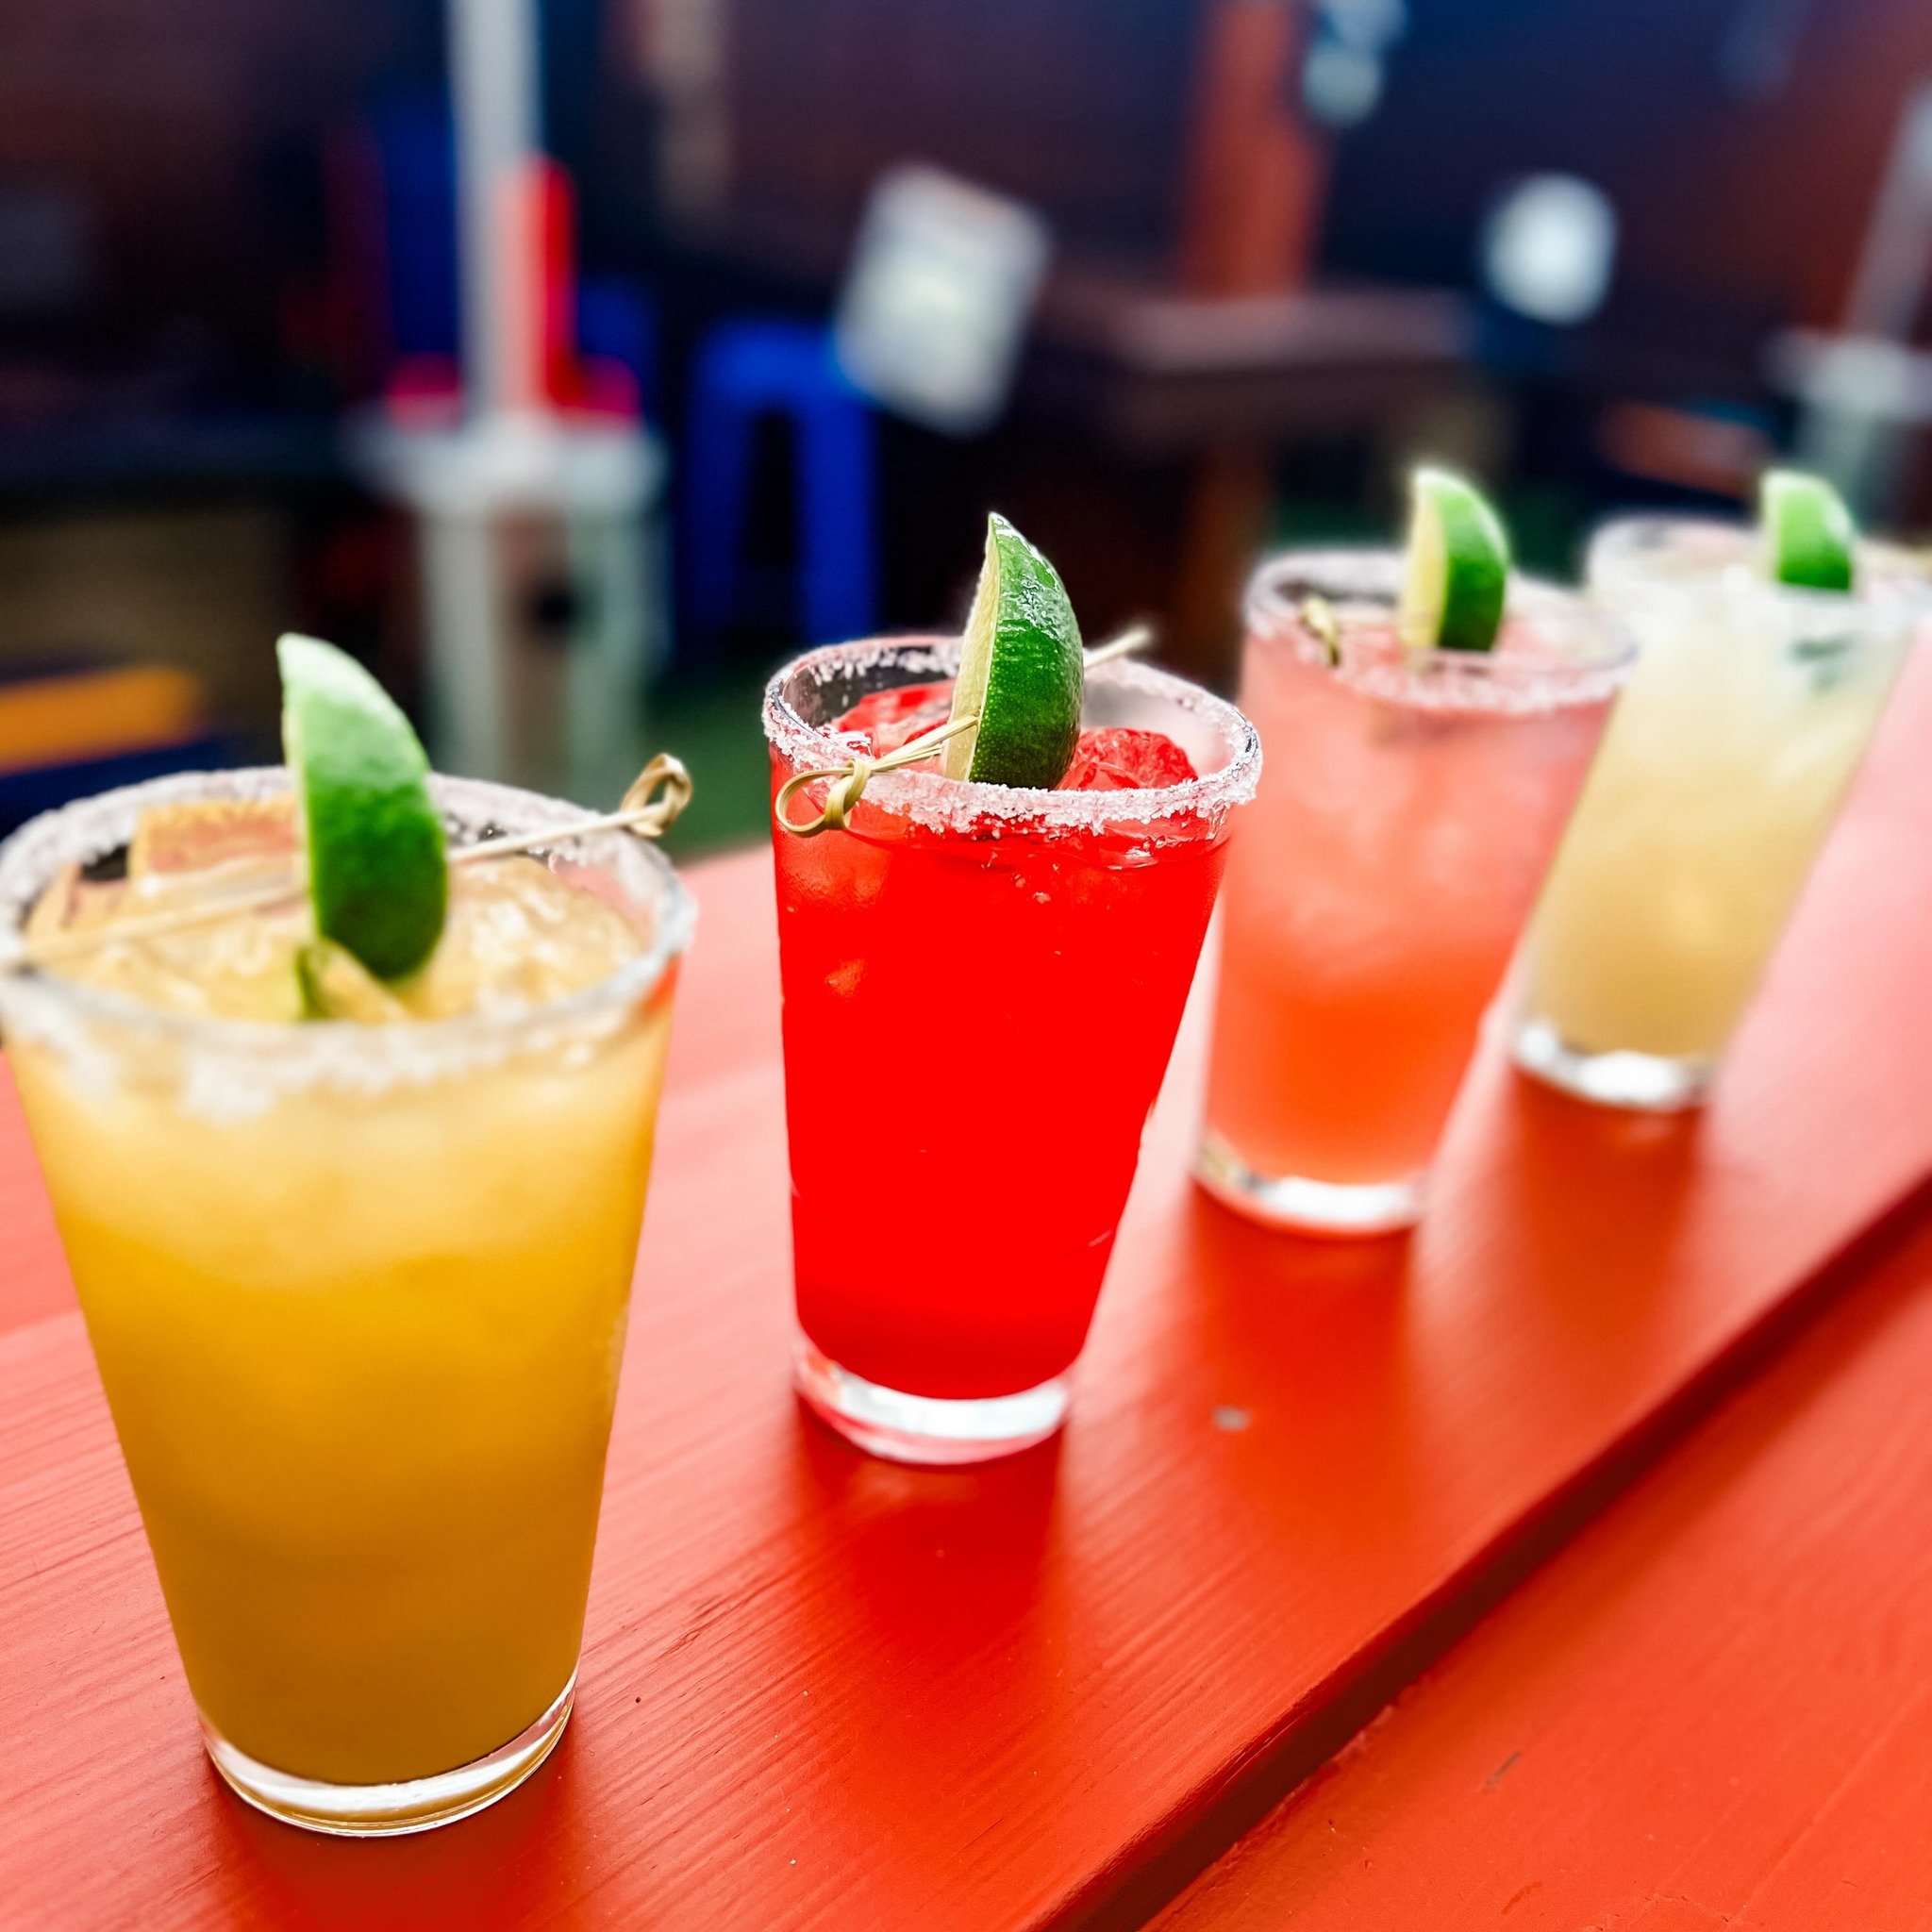 Tonight&rsquo;s Lineup?  Tequila and Live Music! Sounds like the perfect little Tuesday. 
🍹 $6 Classic Margs
 🍓 $7 Fruity Margs
 🥃 $5 Tequila Shots
🎸 @downbeatshow @ 7pm!